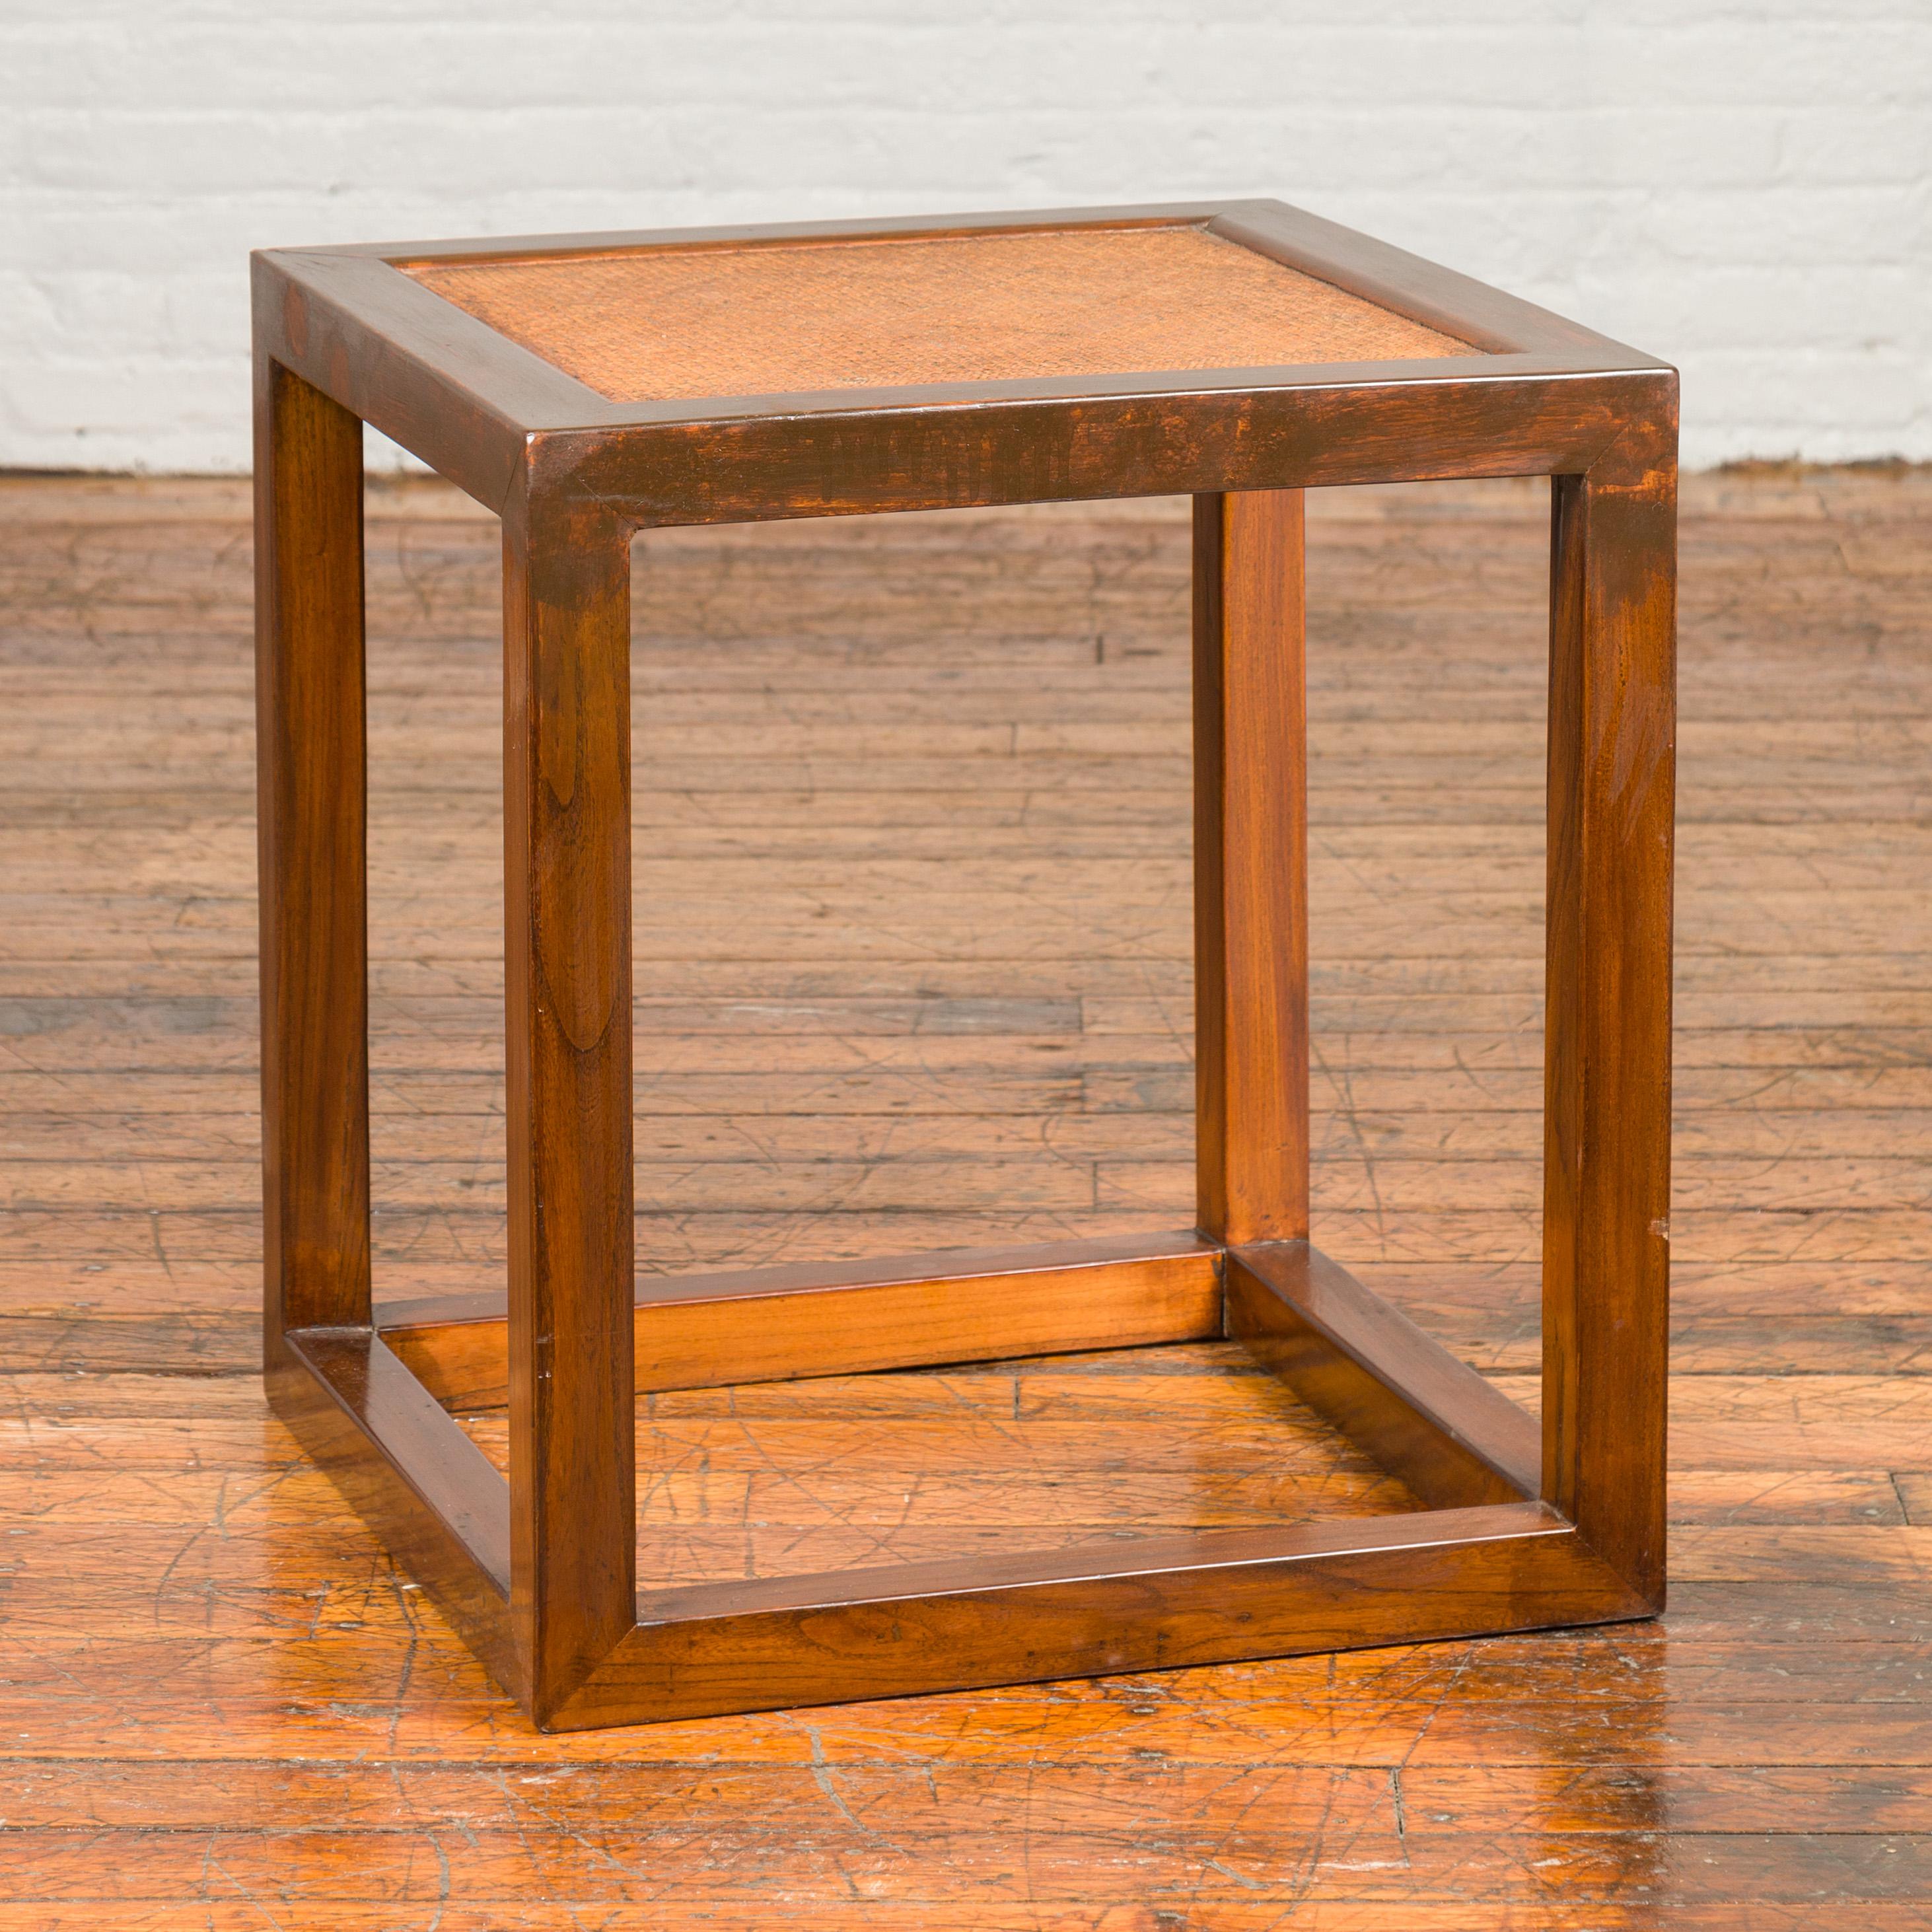 20th Century Minimalist Cubic Side Table with Rattan Top, Straight Legs and Stretchers For Sale